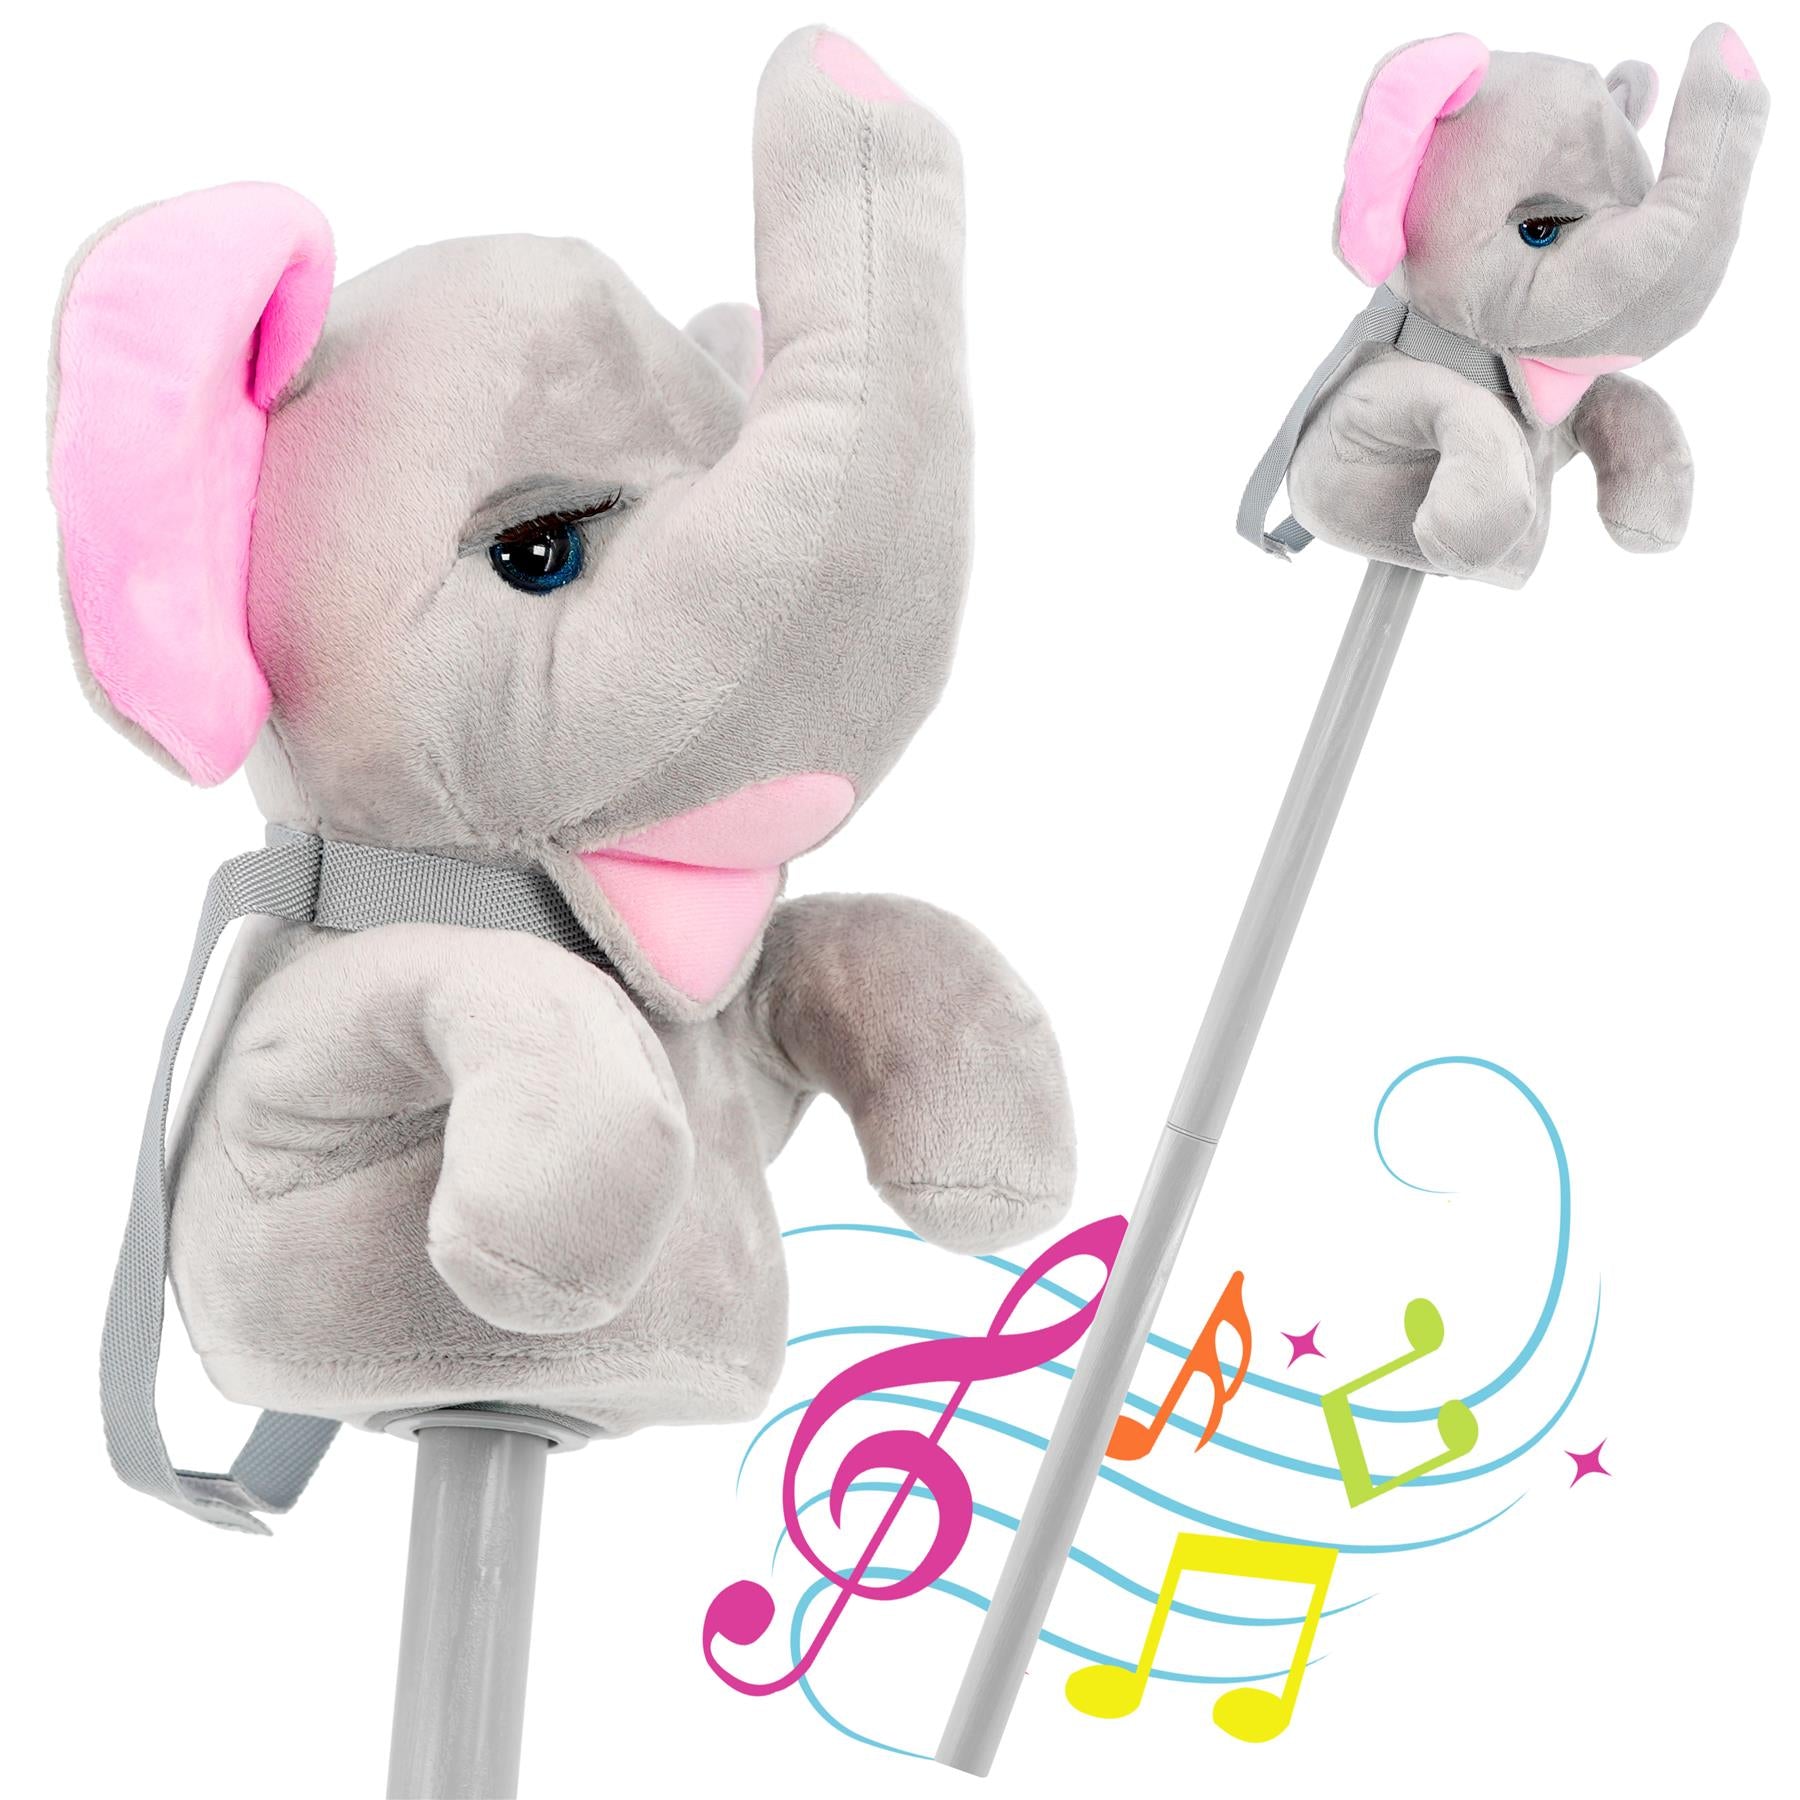 The Magic Toy Shop Kids Hobby Horse Elephant with Sounds